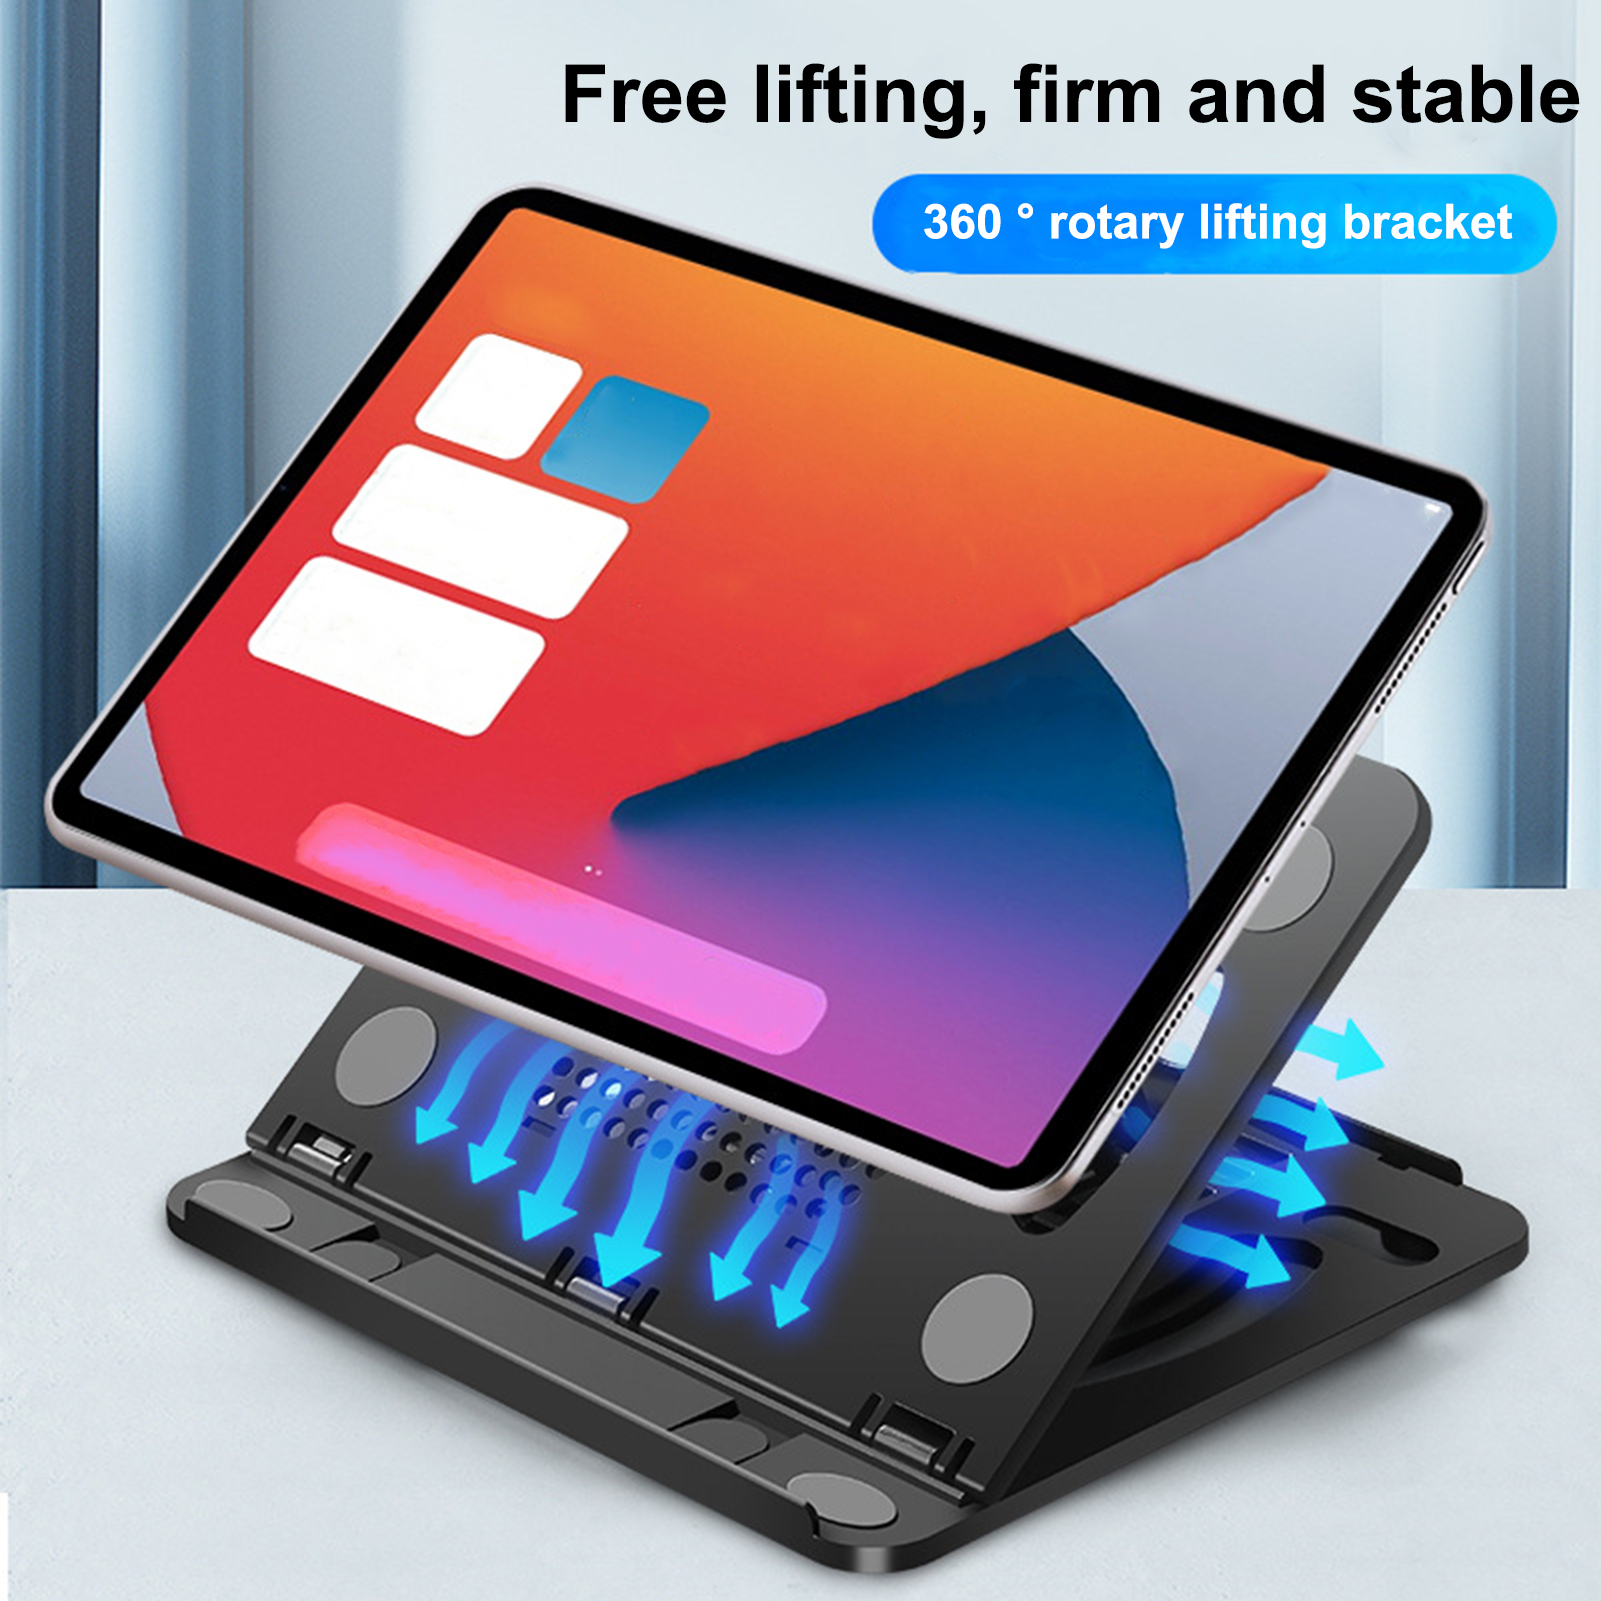 Lomubue Laptop Stand Hollow-out Heat Dissipation 8-speed Angle Adjustable Free Lift Stable Support Dual-use Phone Tablet Folding Stand Desktop Holder Office Supplies - image 2 of 10